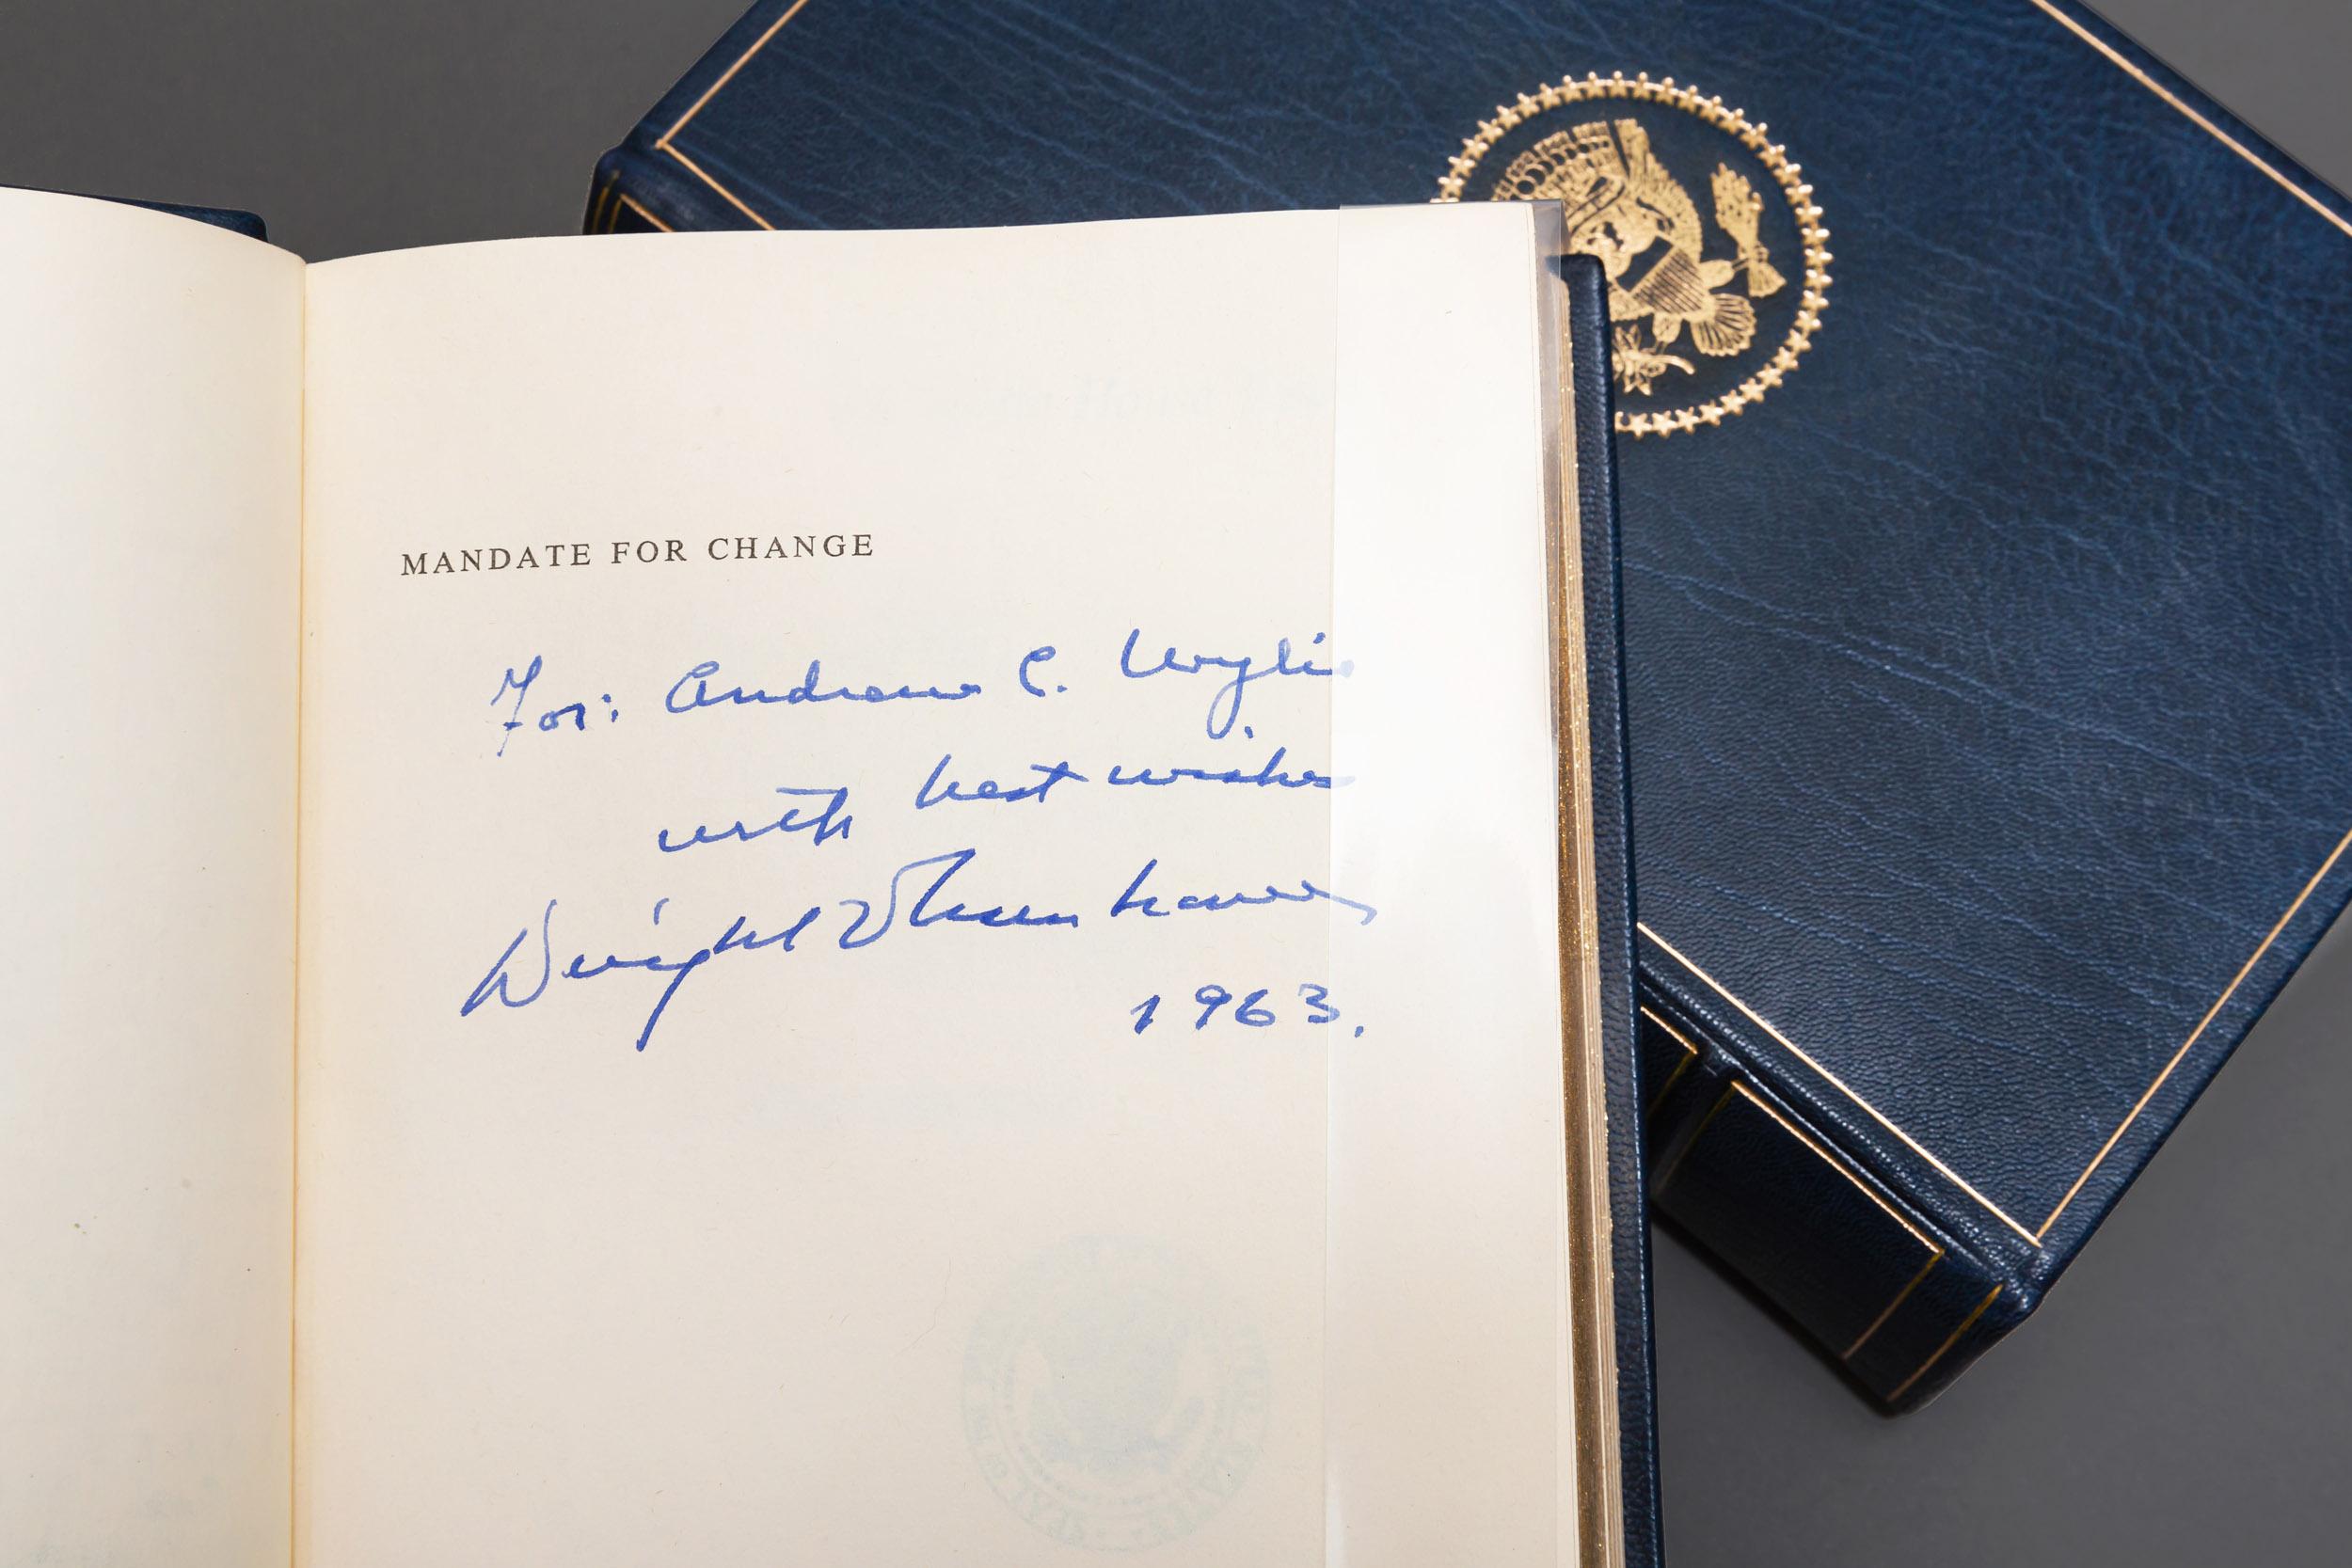 Dwight D. Eisenhower. The White House Years: Mandate For Change (1953-1956) (1956-1961)

2 Volumes

Rebound in full blue morocco, all edges gilt, raised bands, gilt panels, presidential seal on front and back covers and marbled